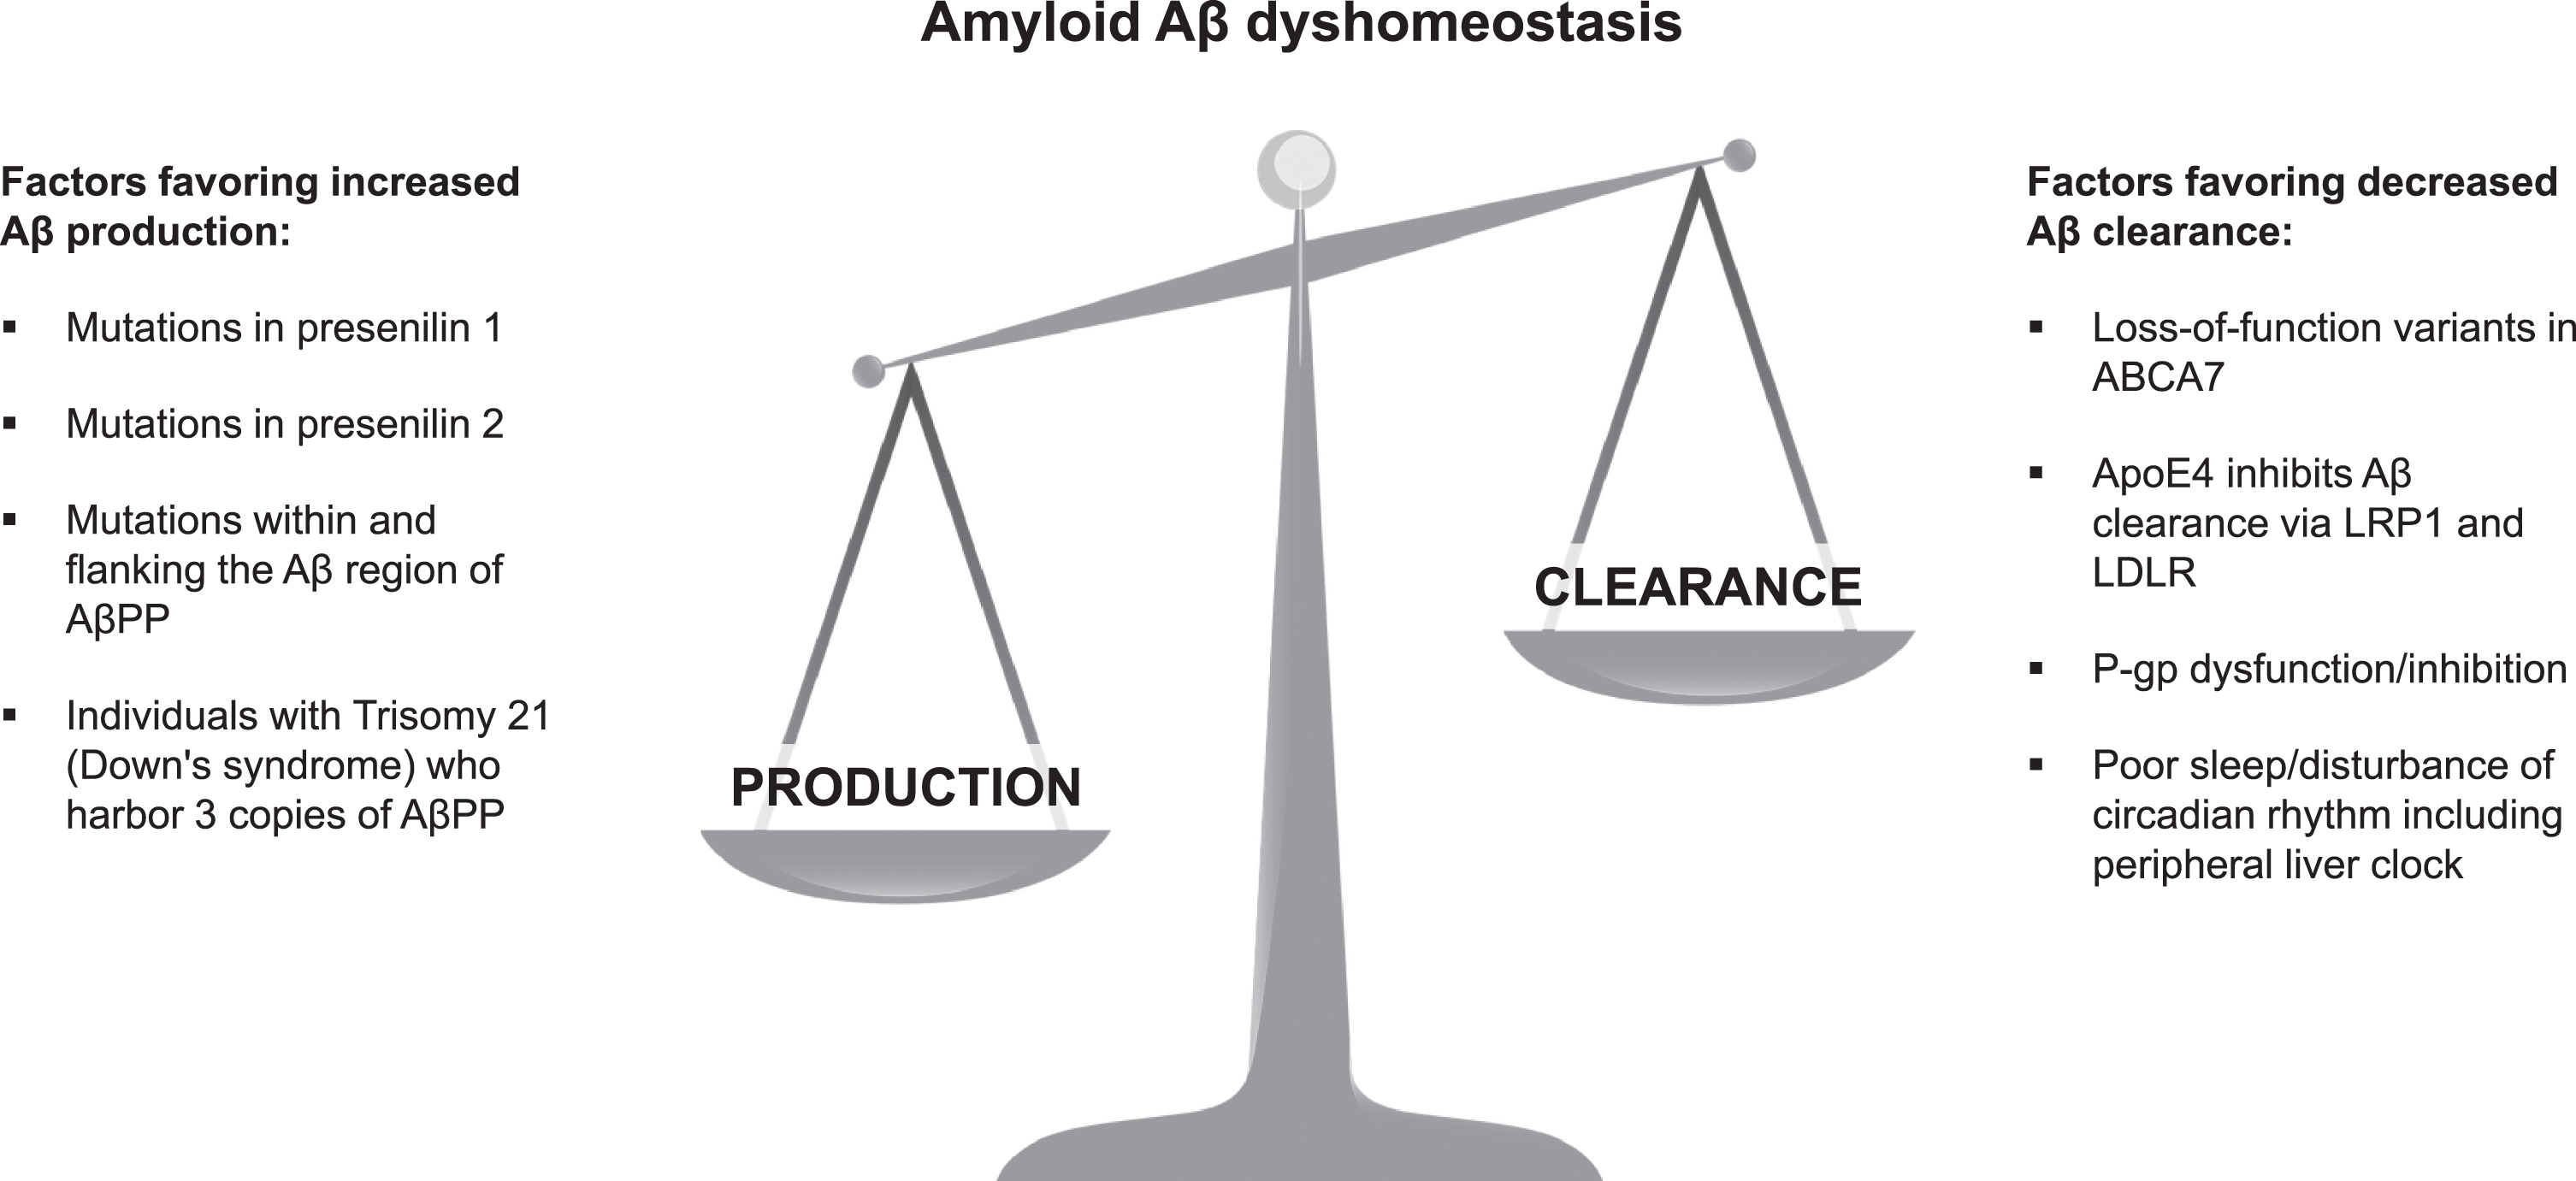 Some factors altering the balance between amyloid Aβ production and clearance leading to dyshomeostasis. Peripheral clearance can remove 40–50% of Aβ burden in the brain [25, 26]. Aβ, amyloid-β; AβPP, amyloid-β protein precursor, LRP1, low-density lipoprotein receptor-related peptide 1; LDLR, low-density-lipoprotein receptor; P-gp, P-glycoprotein.